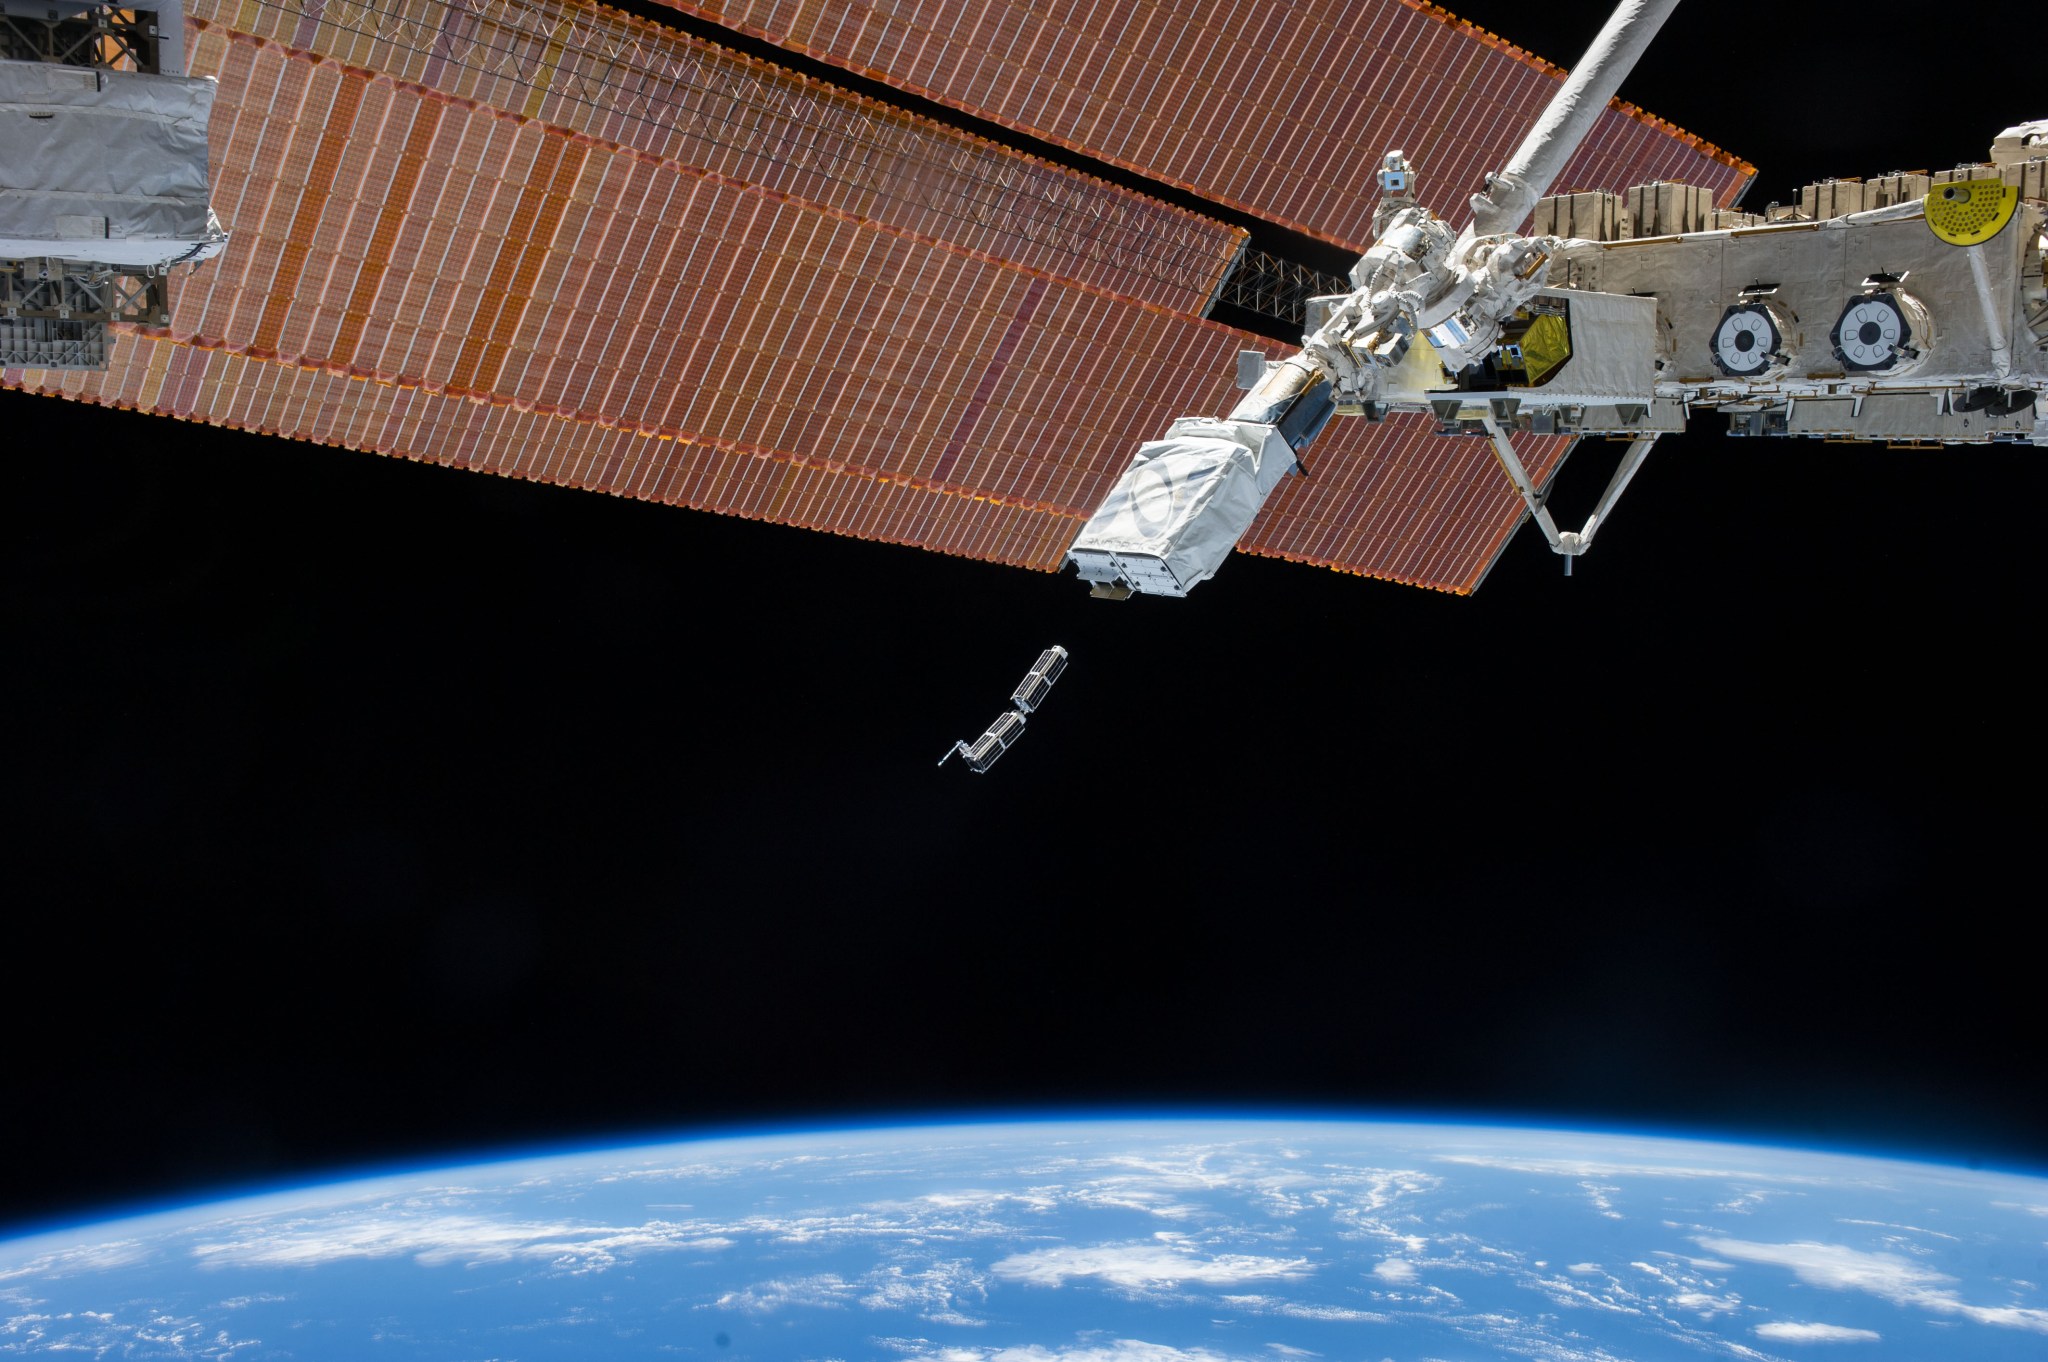 Planet Labs Nanosatellites Ejected from the International Space Station